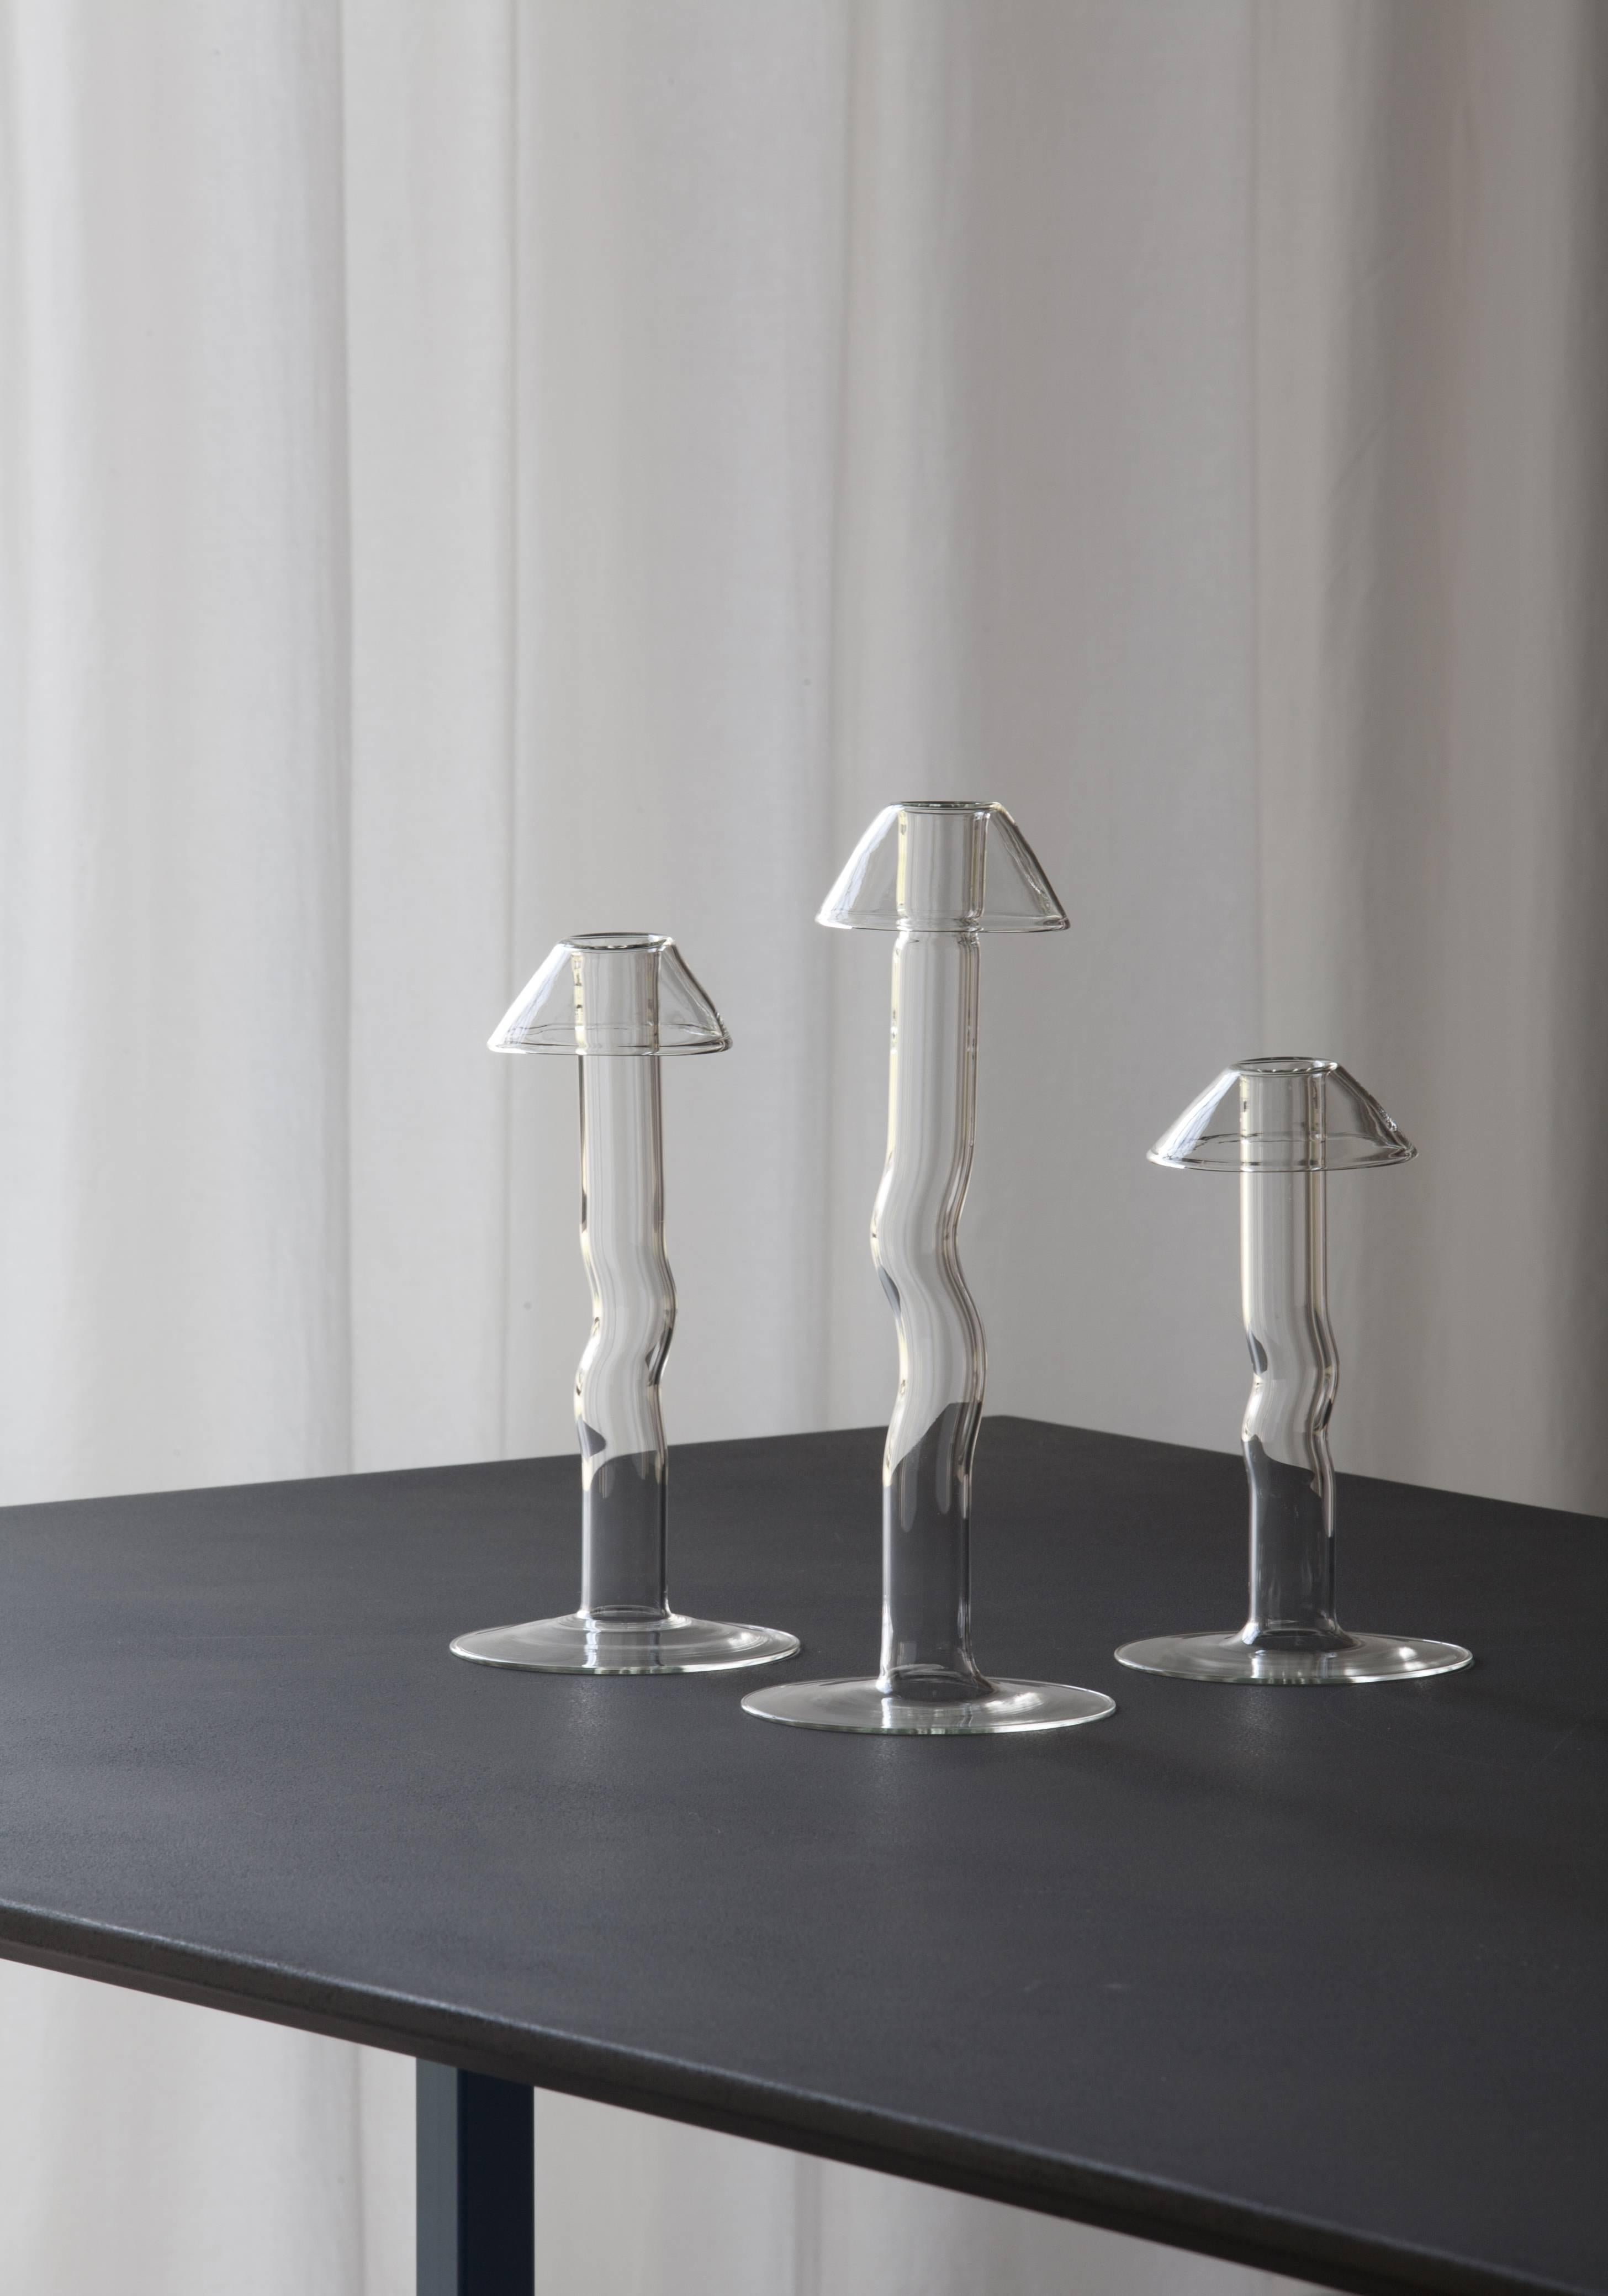 Mykes is a collection of refined handblown glass candle stands produced in three different sizes with the shape of a mushroom. Inspired by ancient Greek culture, the mushroom was considered a symbol of life endowed with divine properties. The